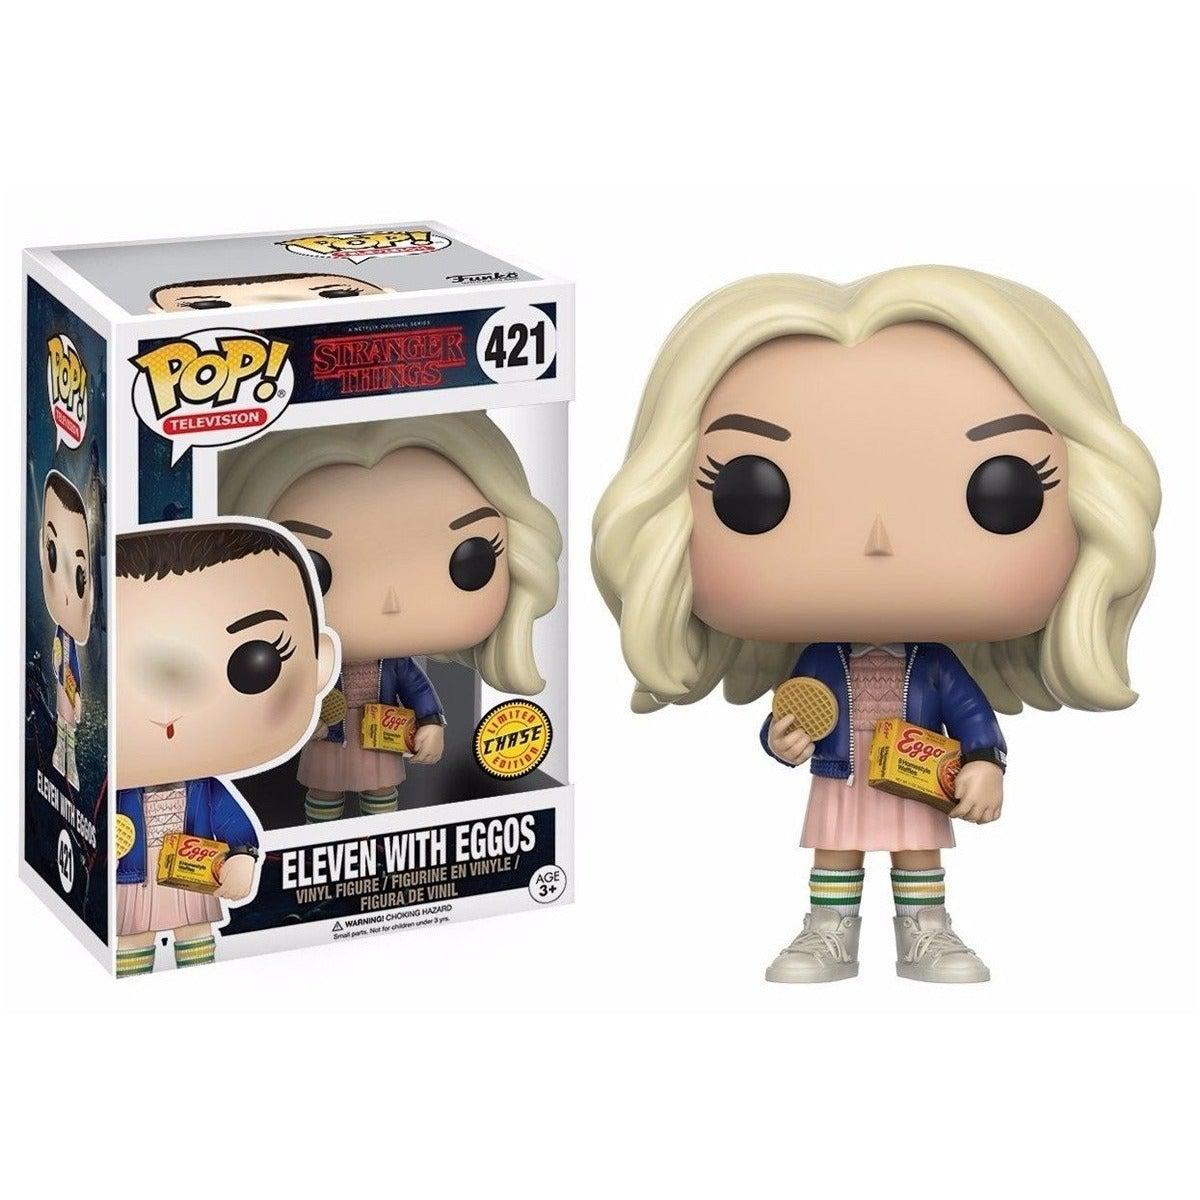 FUNKO Pop! Stranger Things Eleven 11 With Eggos CHASE Limited Spec Fiction Shop